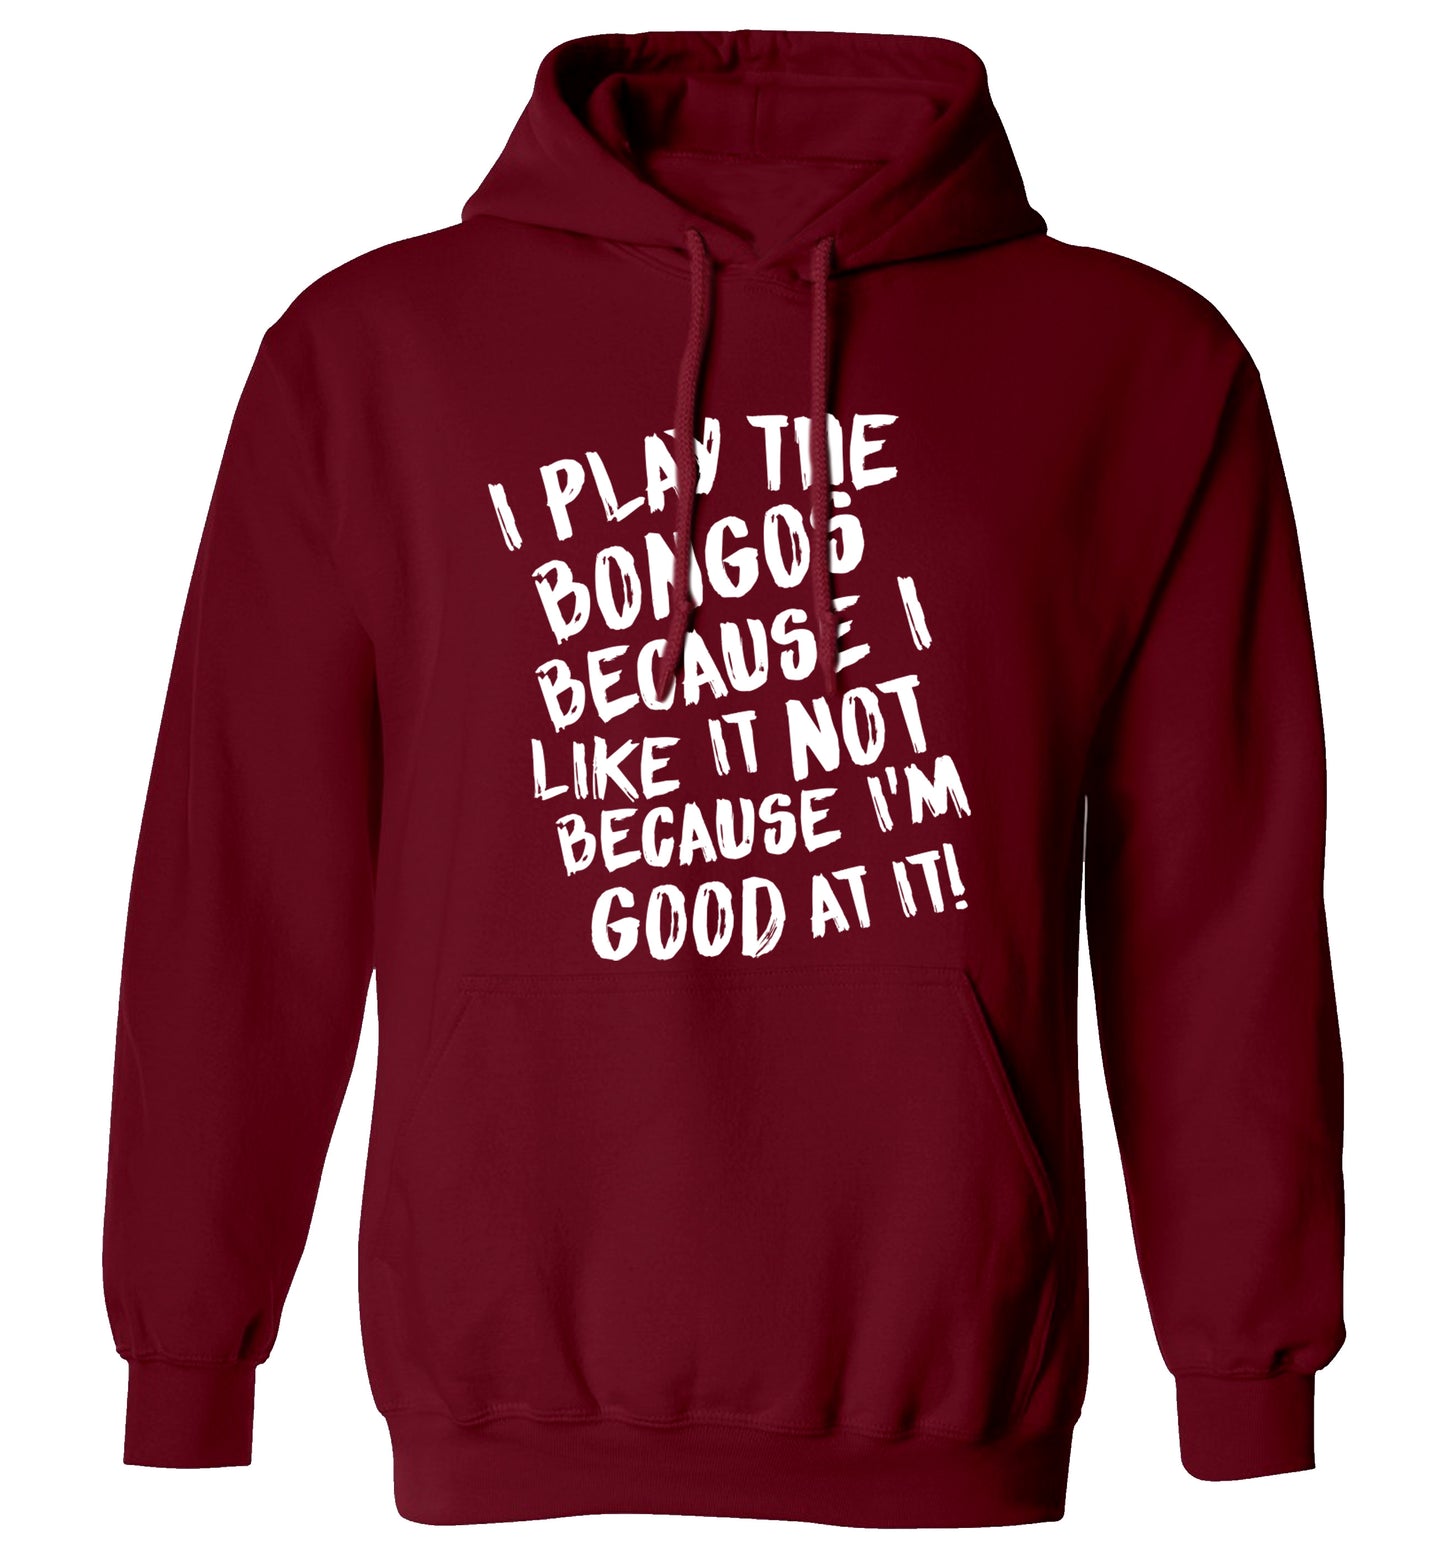 I play the bongos because I like it not because I'm good at it adults unisex maroon hoodie 2XL